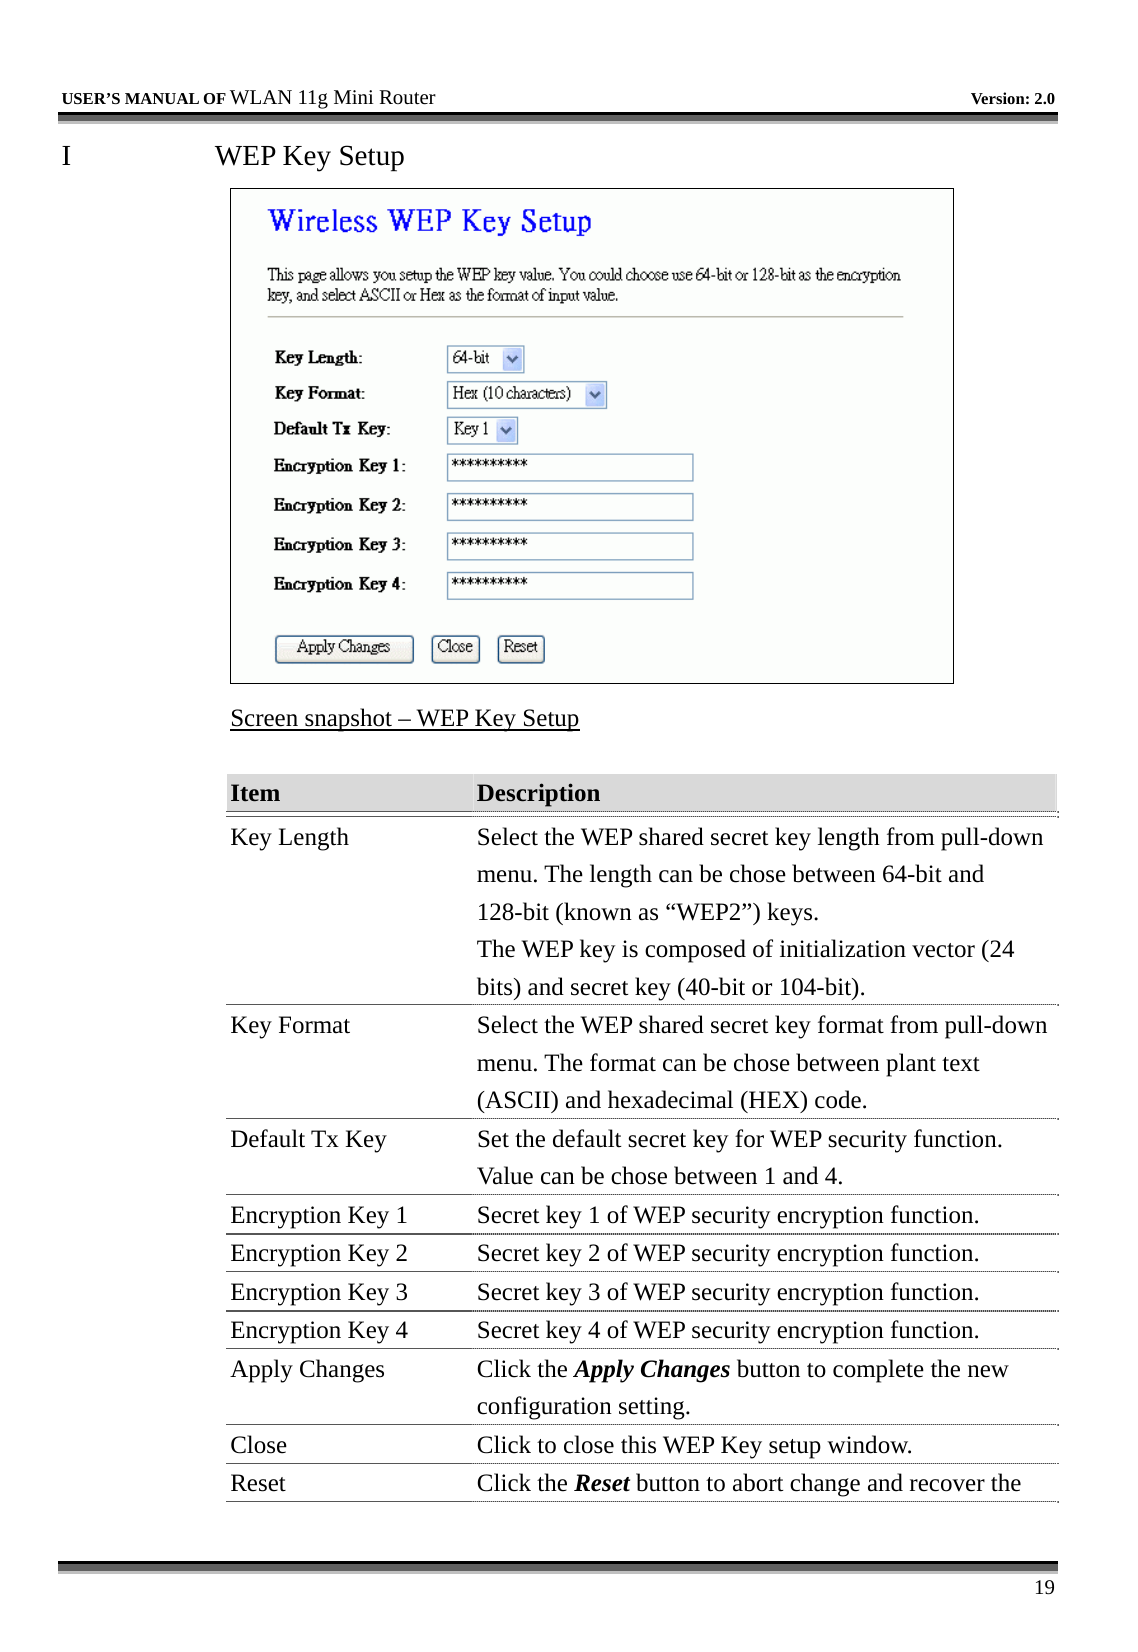   USER’S MANUAL OF WLAN 11g Mini Router   Version: 2.0     19 I  WEP Key Setup  Screen snapshot – WEP Key Setup  Item  Description   Key Length  Select the WEP shared secret key length from pull-down menu. The length can be chose between 64-bit and 128-bit (known as “WEP2”) keys.   The WEP key is composed of initialization vector (24 bits) and secret key (40-bit or 104-bit). Key Format  Select the WEP shared secret key format from pull-down menu. The format can be chose between plant text (ASCII) and hexadecimal (HEX) code. Default Tx Key  Set the default secret key for WEP security function. Value can be chose between 1 and 4. Encryption Key 1  Secret key 1 of WEP security encryption function. Encryption Key 2  Secret key 2 of WEP security encryption function. Encryption Key 3  Secret key 3 of WEP security encryption function. Encryption Key 4  Secret key 4 of WEP security encryption function. Apply Changes  Click the Apply Changes button to complete the new configuration setting. Close  Click to close this WEP Key setup window. Reset Click the Reset button to abort change and recover the 